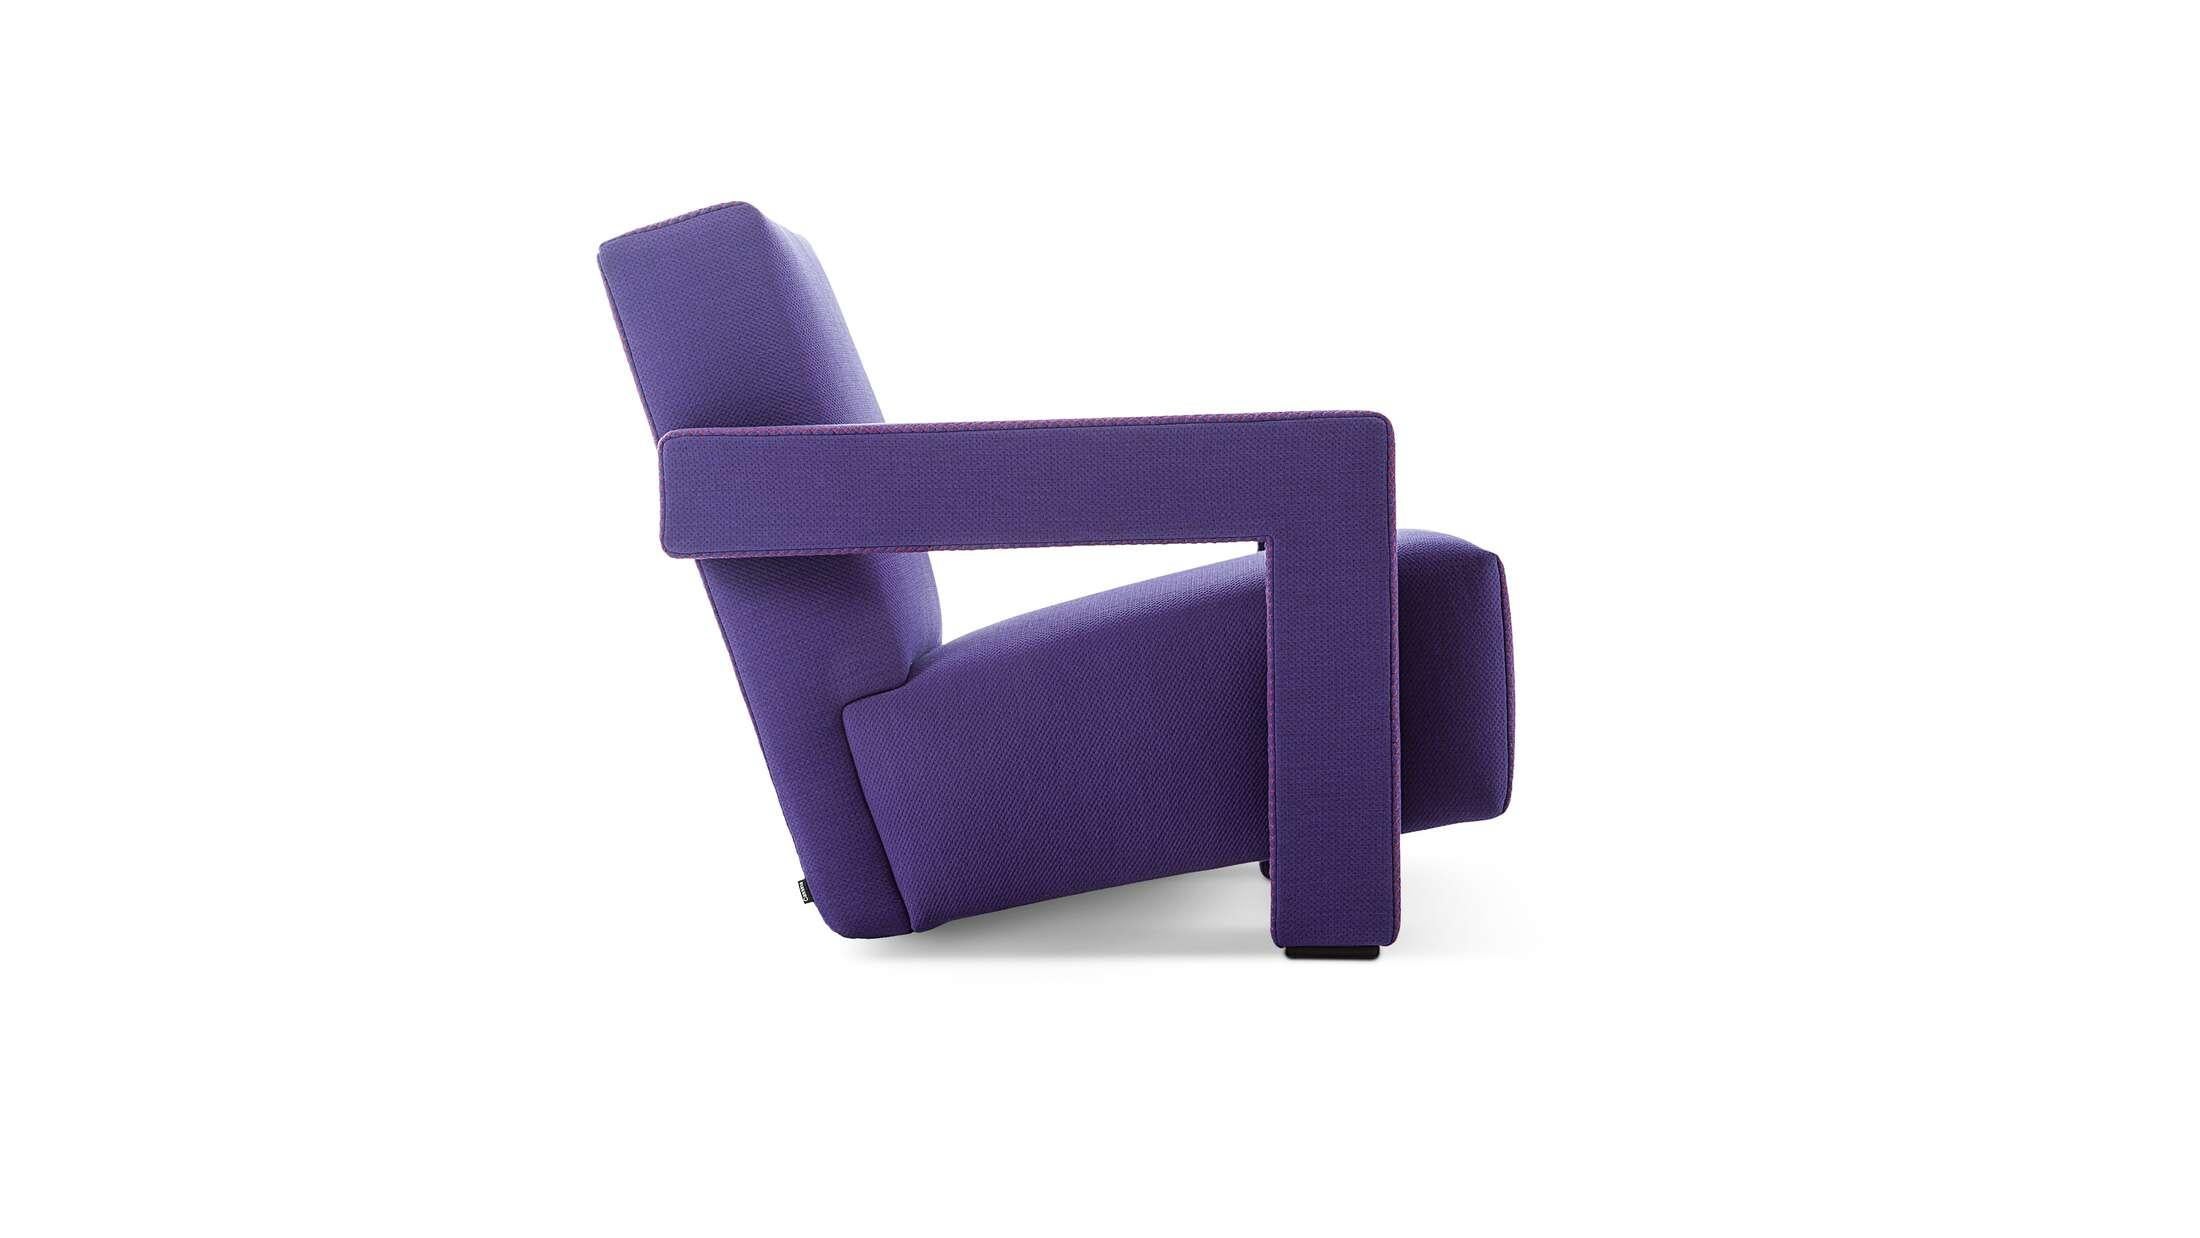 Prices vary dependent on the chosen material/color. 

Armchair designed by Gerrit Thomas Rietveld in 1935. Relaunched in 2015. Manufactured by Cassina in Italy. Available in many different colors. 